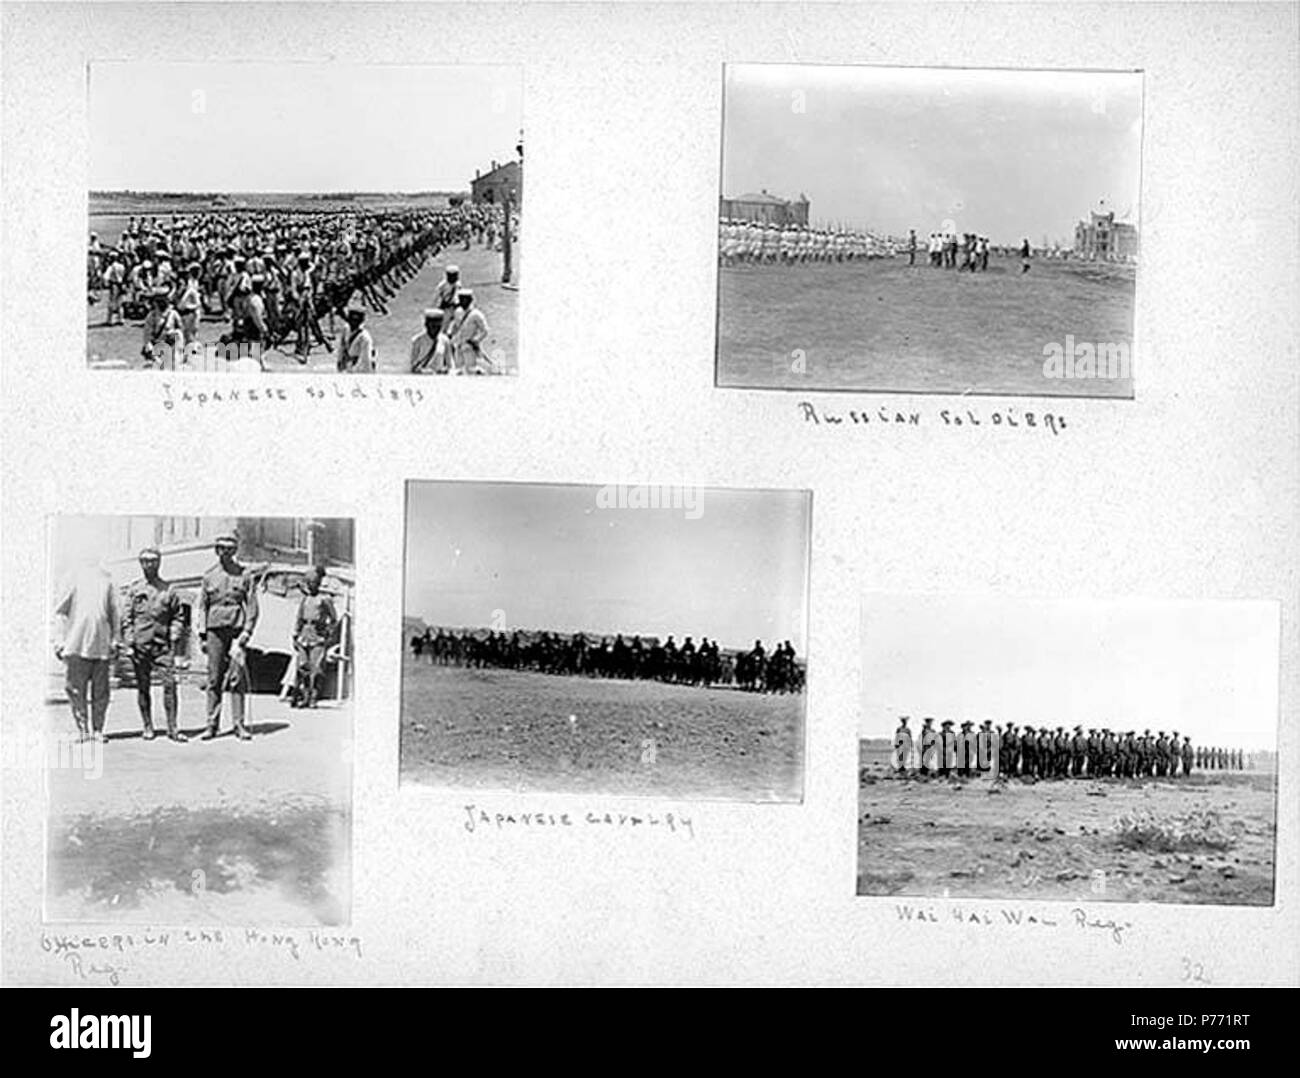 . English: 7.33 Japanese, Russian, and Chinese troops, ca. 1899-1901 . English: Captions on album page: Japanese soldiers; Russian soldiers; Officers in the Hong Kong Reg.; Japanese cavalry; Wai Hai Wai Reg . PH Coll 241.B33a-e Subjects (LCTGM): Soldiers--China; Cavalry--Japanese--China; Horses--China; Military officers--Chinese--China; Military uniforms--China Subjects (LCSH): China--History--Boxer Rebellion, 1899-1901; Hong Kong. Royal Hong Kong Defence Force. Hong Kong Regiment; Portraits, Group  . circa 1899-1901 1 733 Japanese, Russian, and Chinese troops, ca 1899-1901 (CHANDLESS 64) Stock Photo